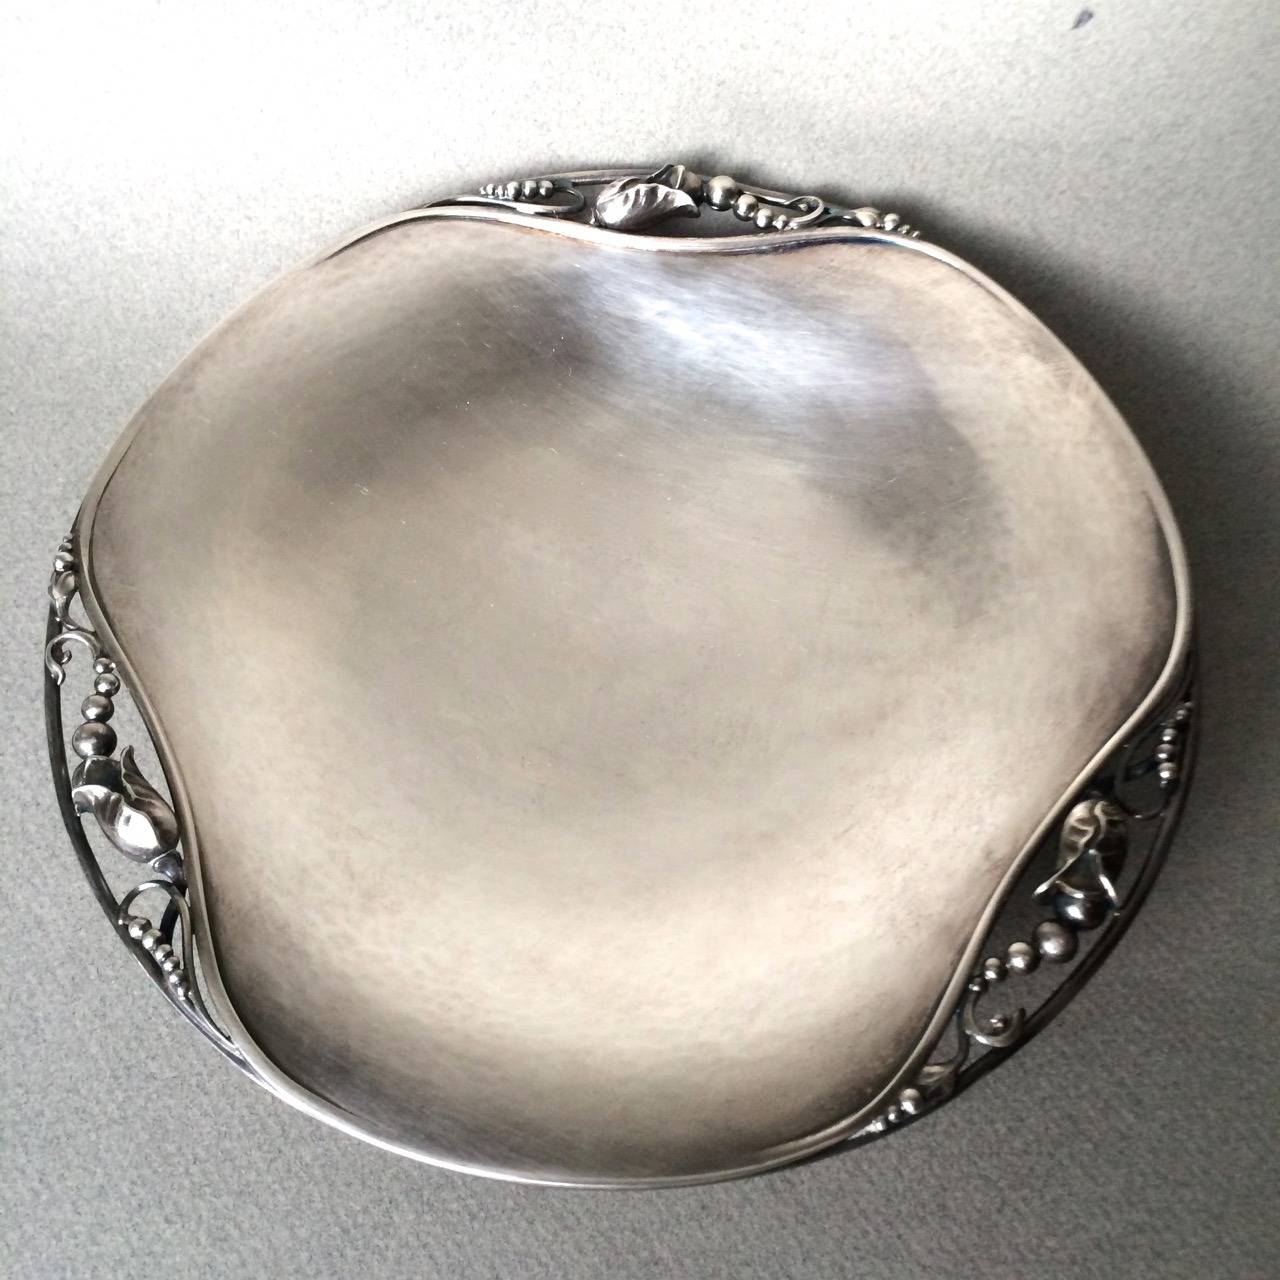 Georg Jensen blossom round footed dish no. 2A.

Three blossom motifs. Very heavy.

Excellent original condition with visible hand hammering. Measures: 7.5